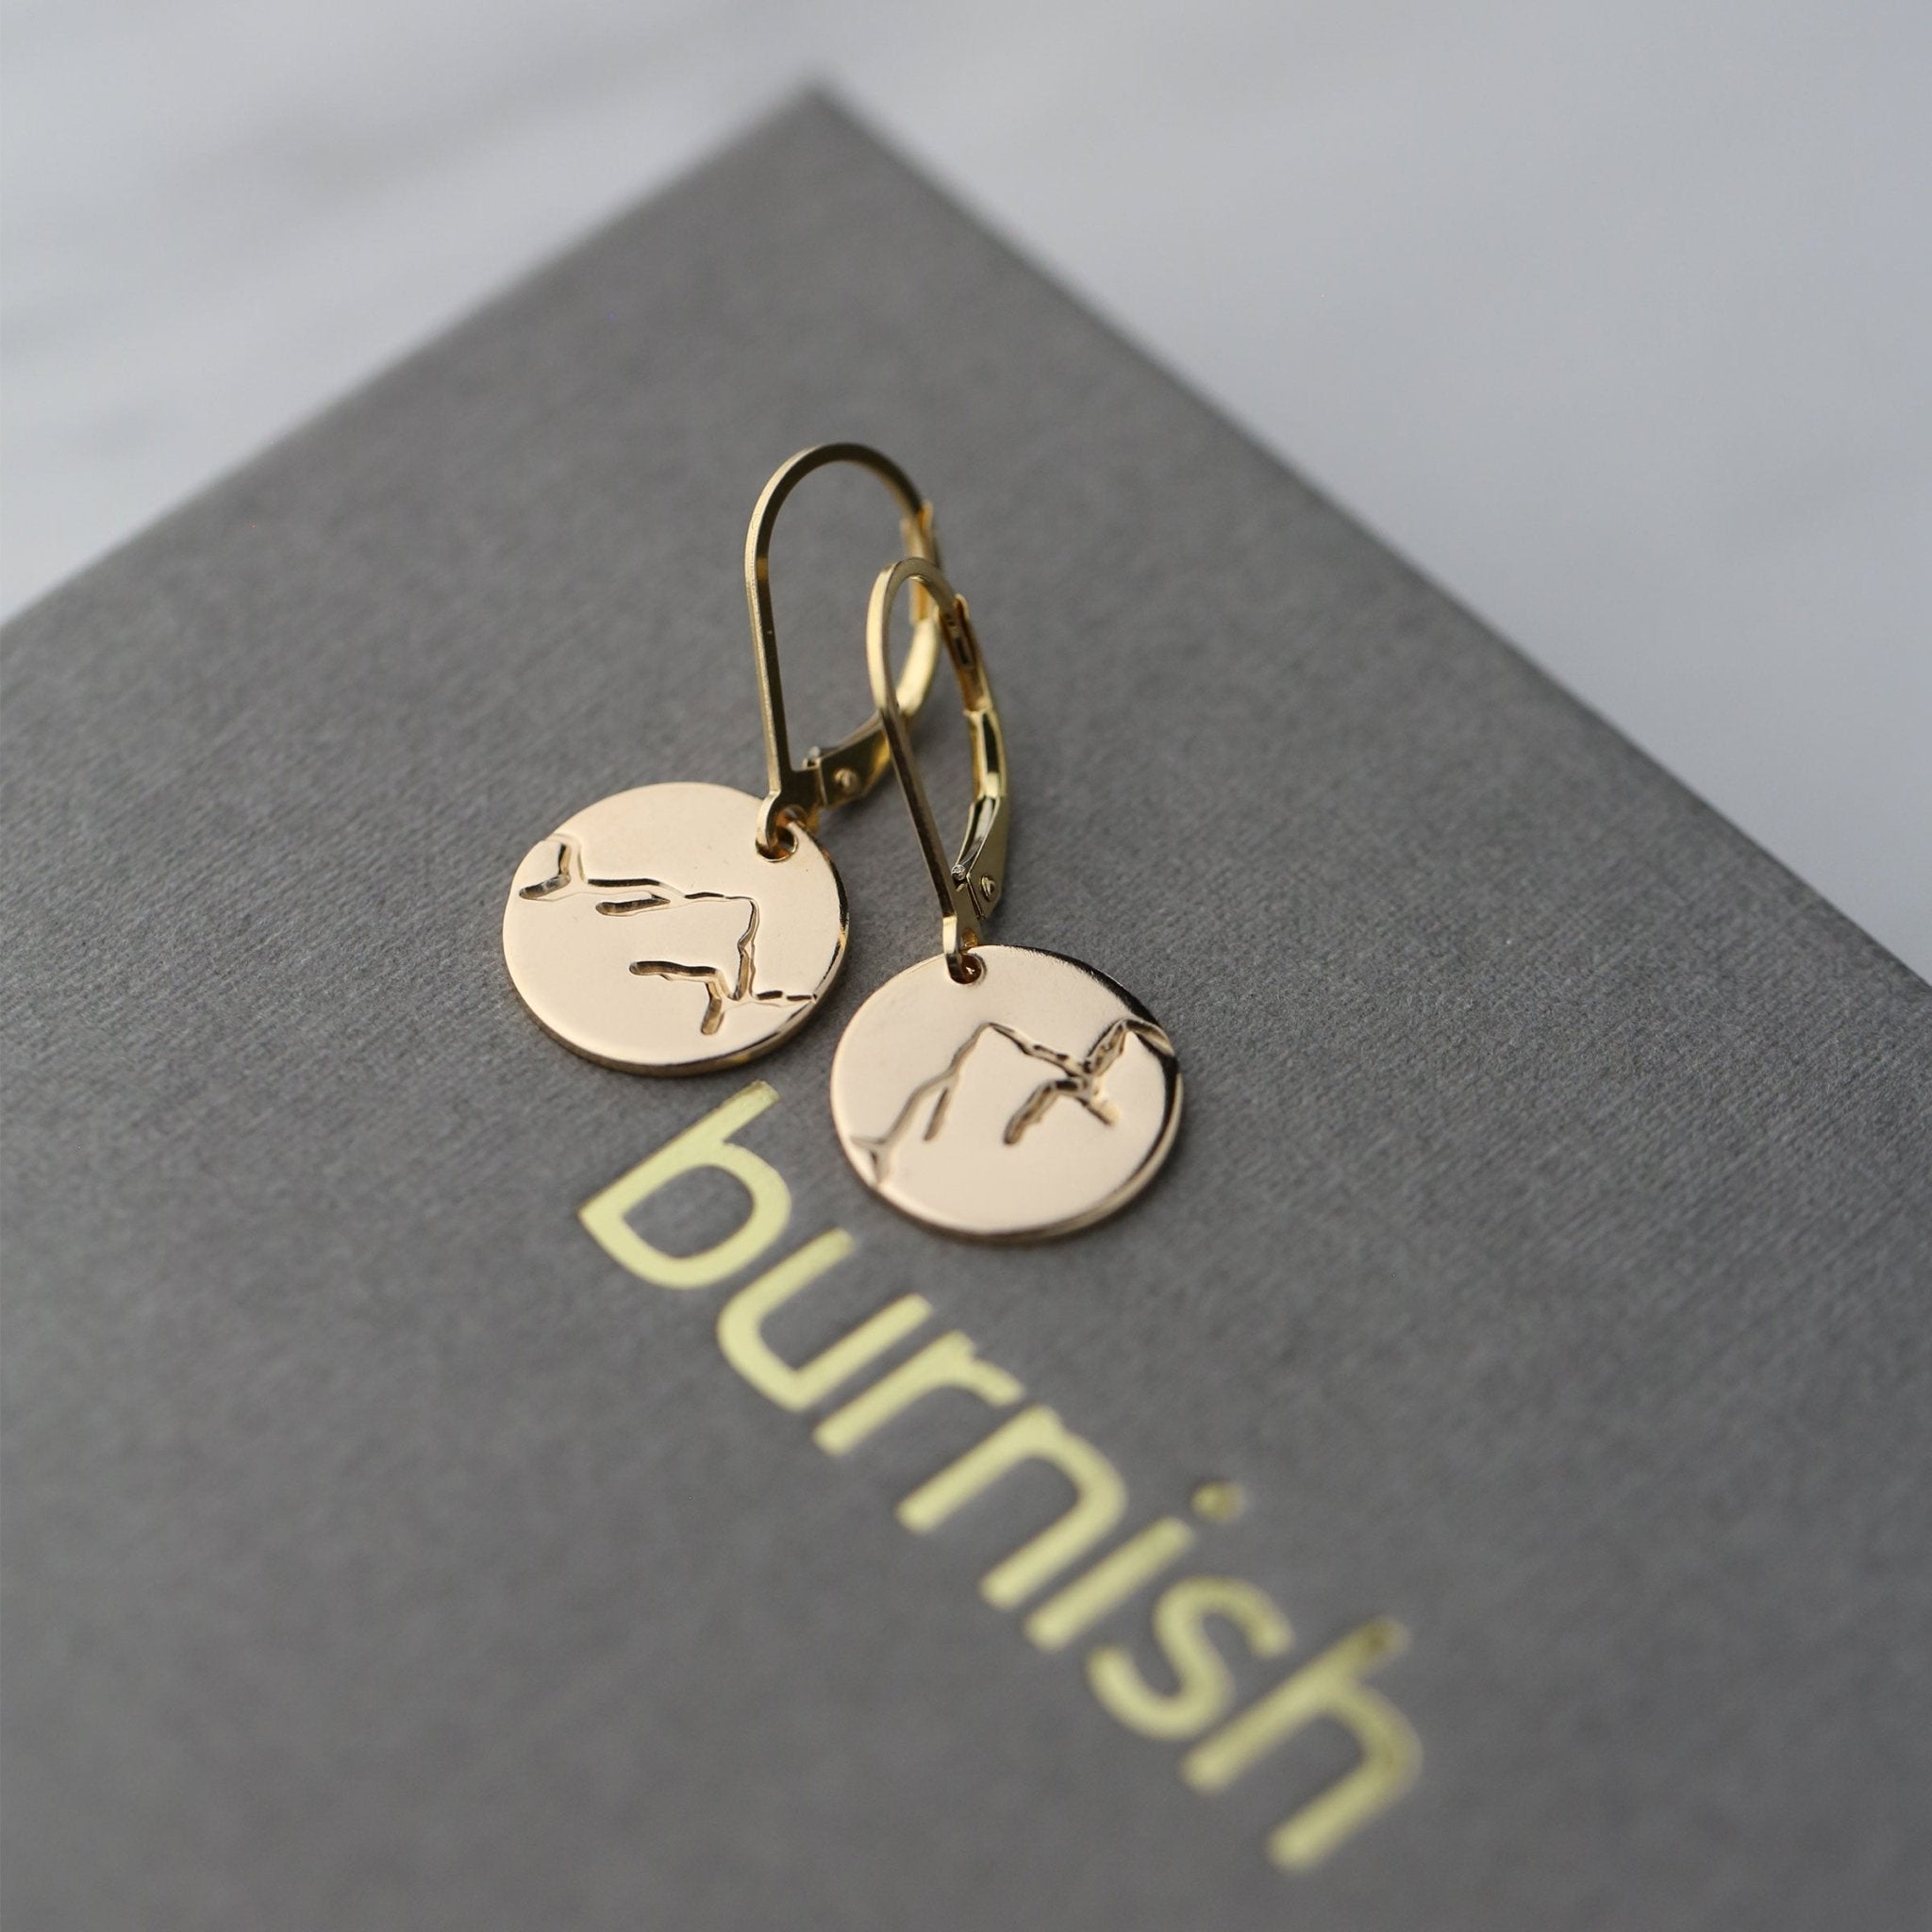 Gold Stamped Mountain Earrings